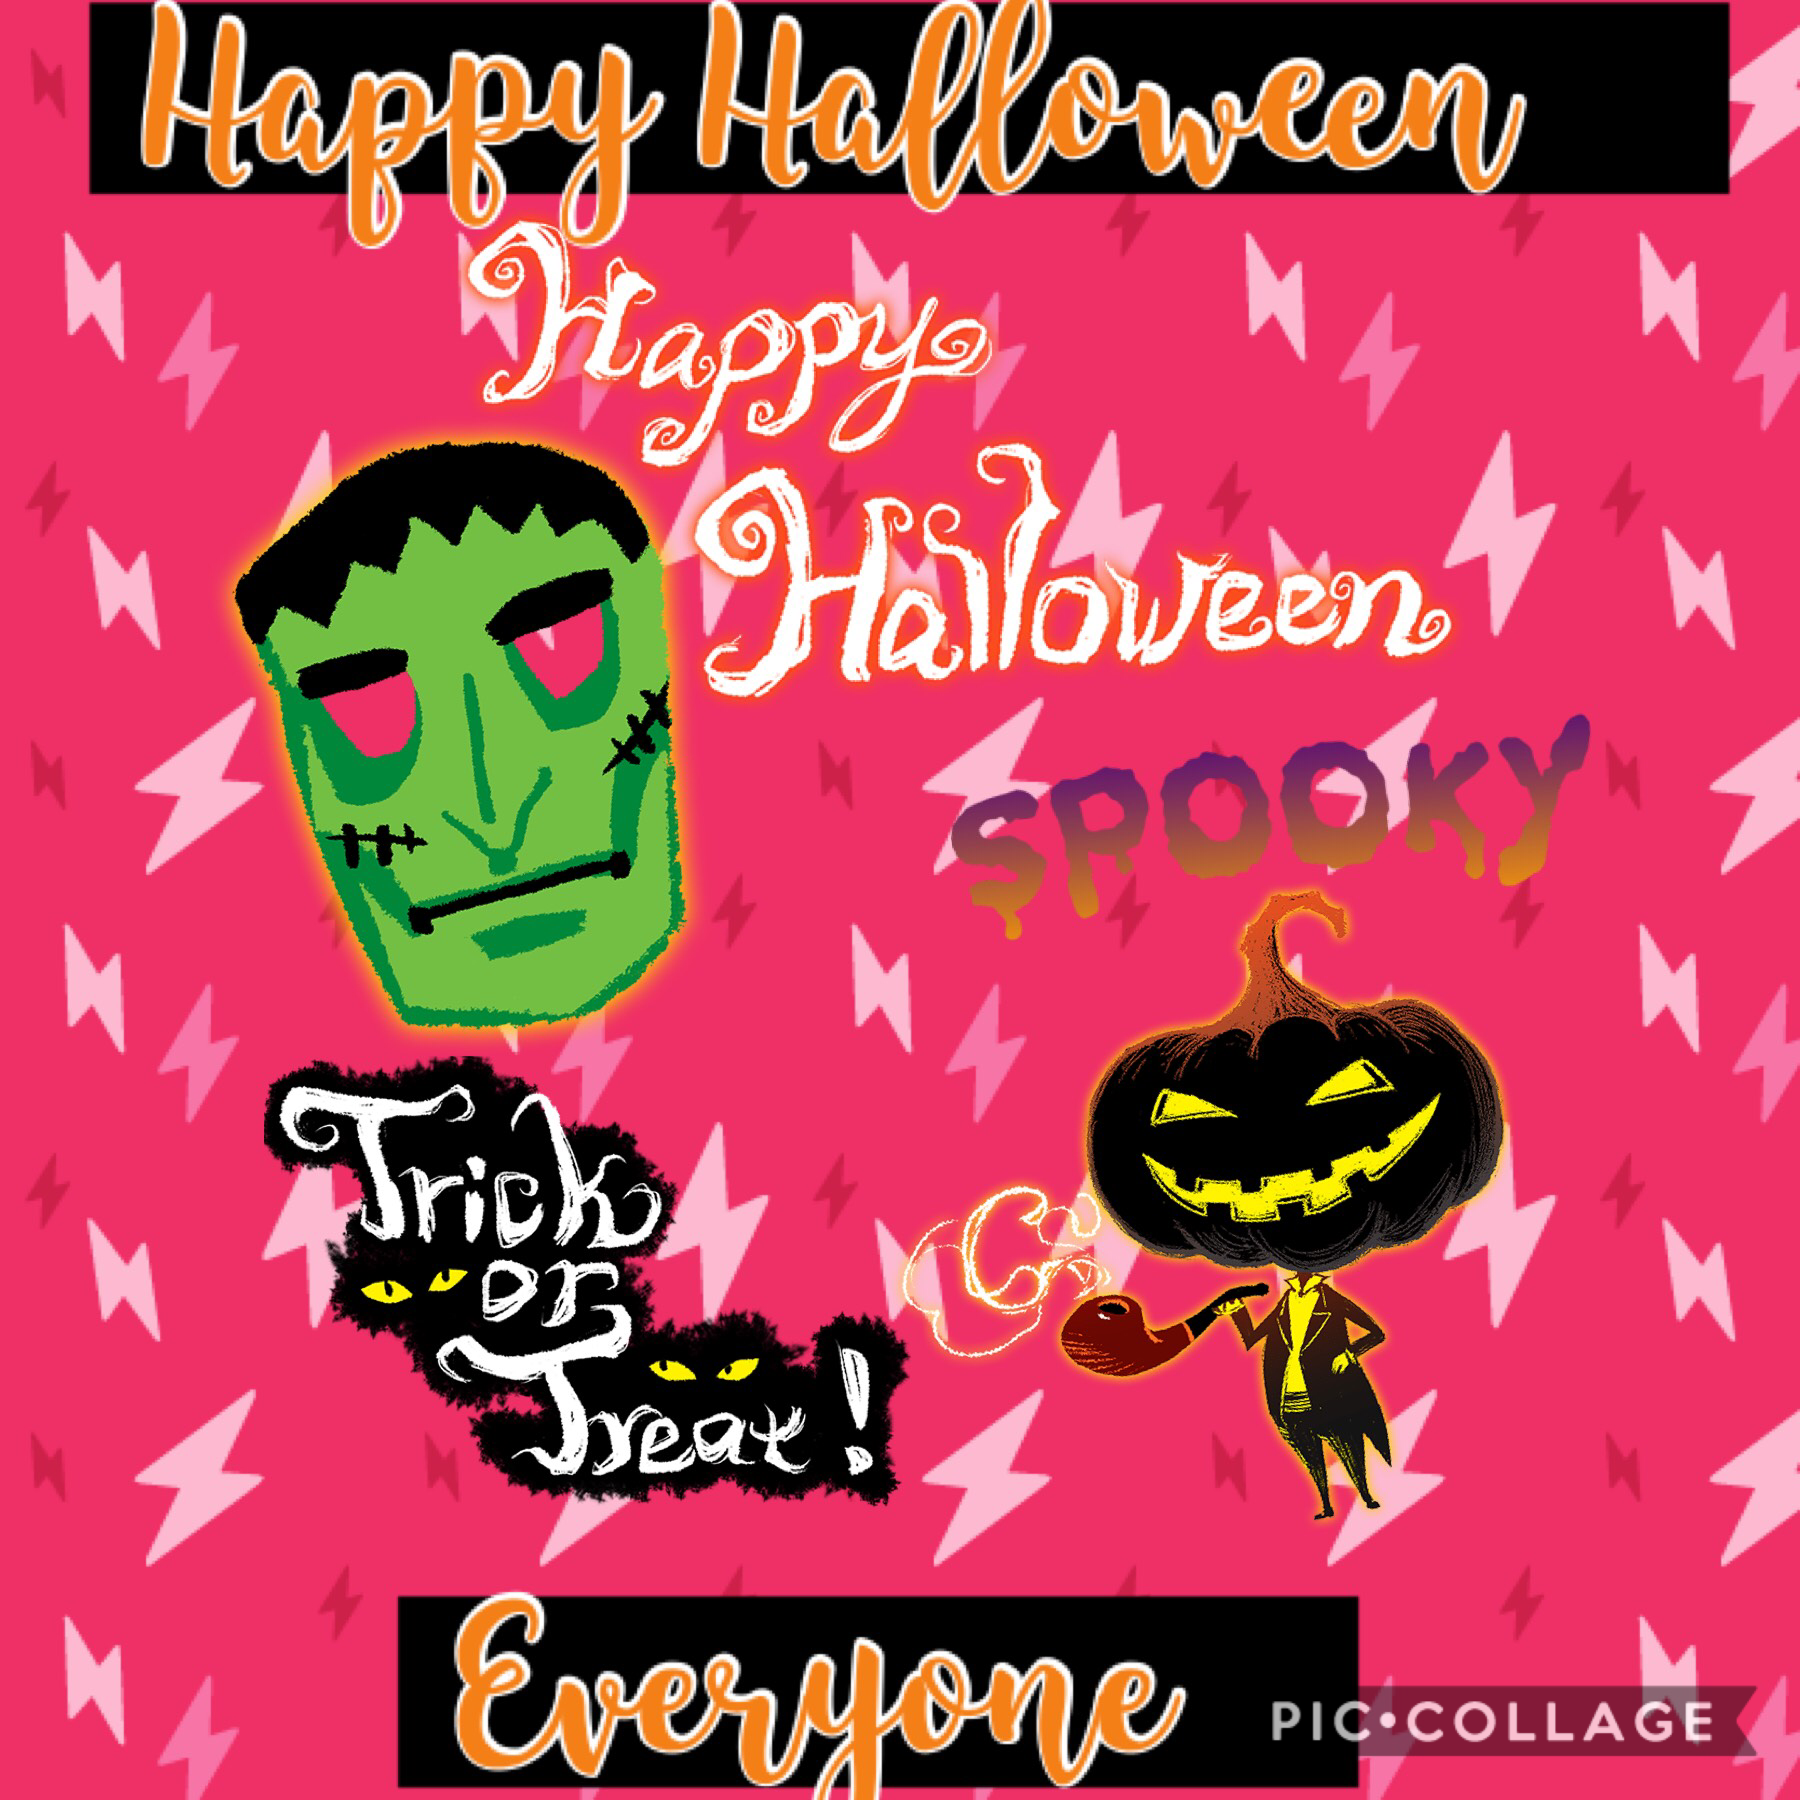 Happy Halloween everyone hope you have an amazing night (not that many of us will go trick or treating) but oh well 